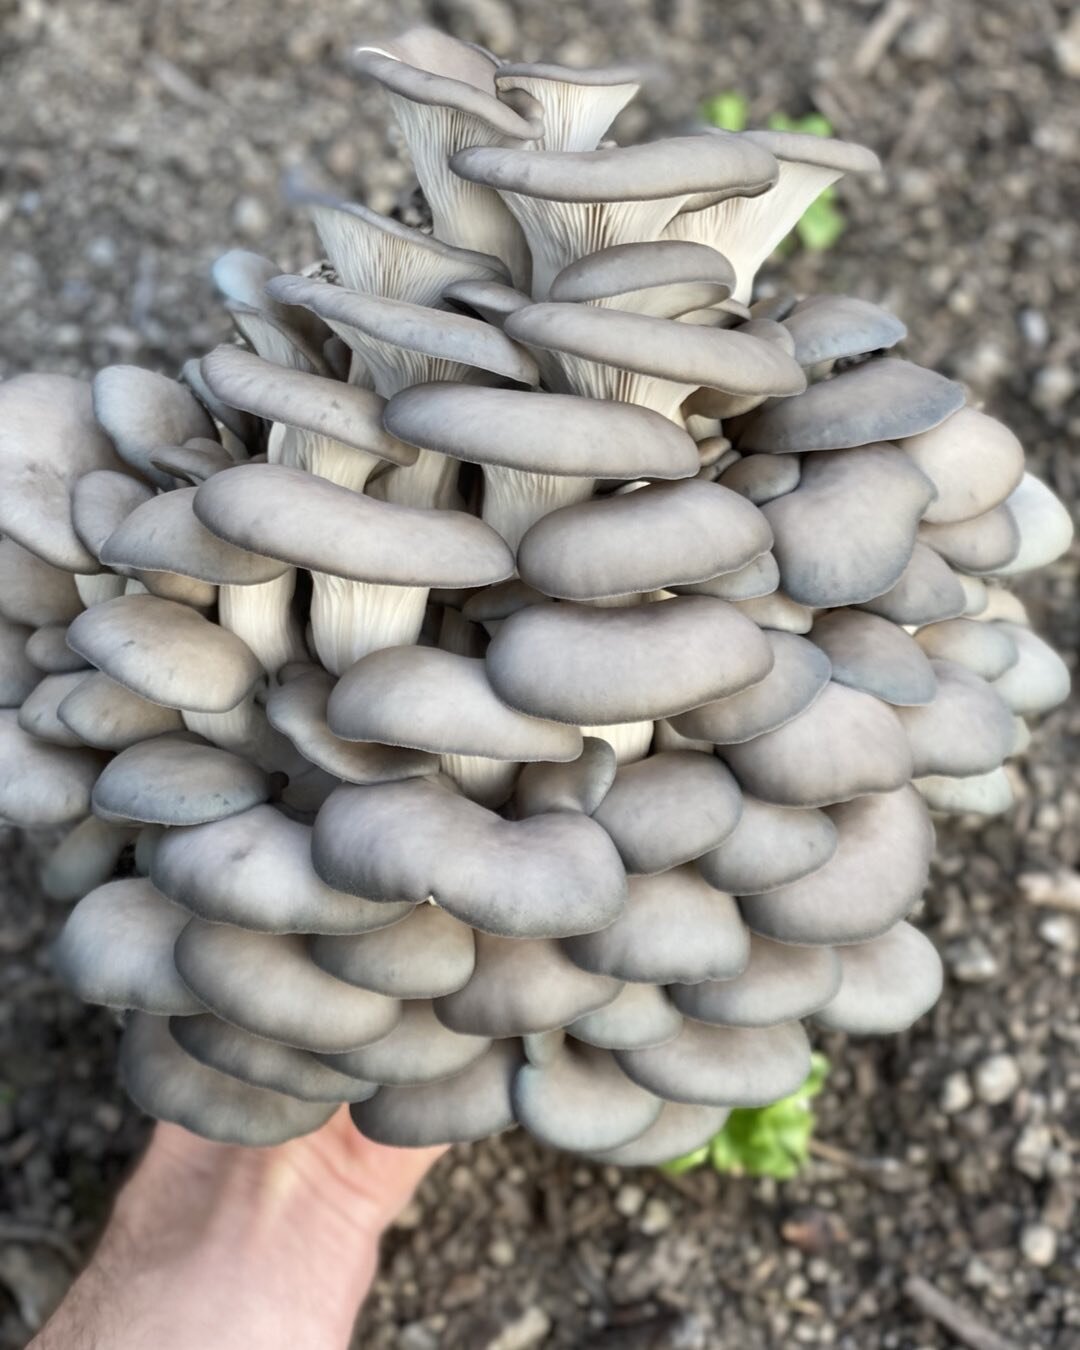 We are starting to harvest our Blue Oyster mushrooms earlier in their cycle, it helps for them to stay fresh longer and retain some of their more blue colors.